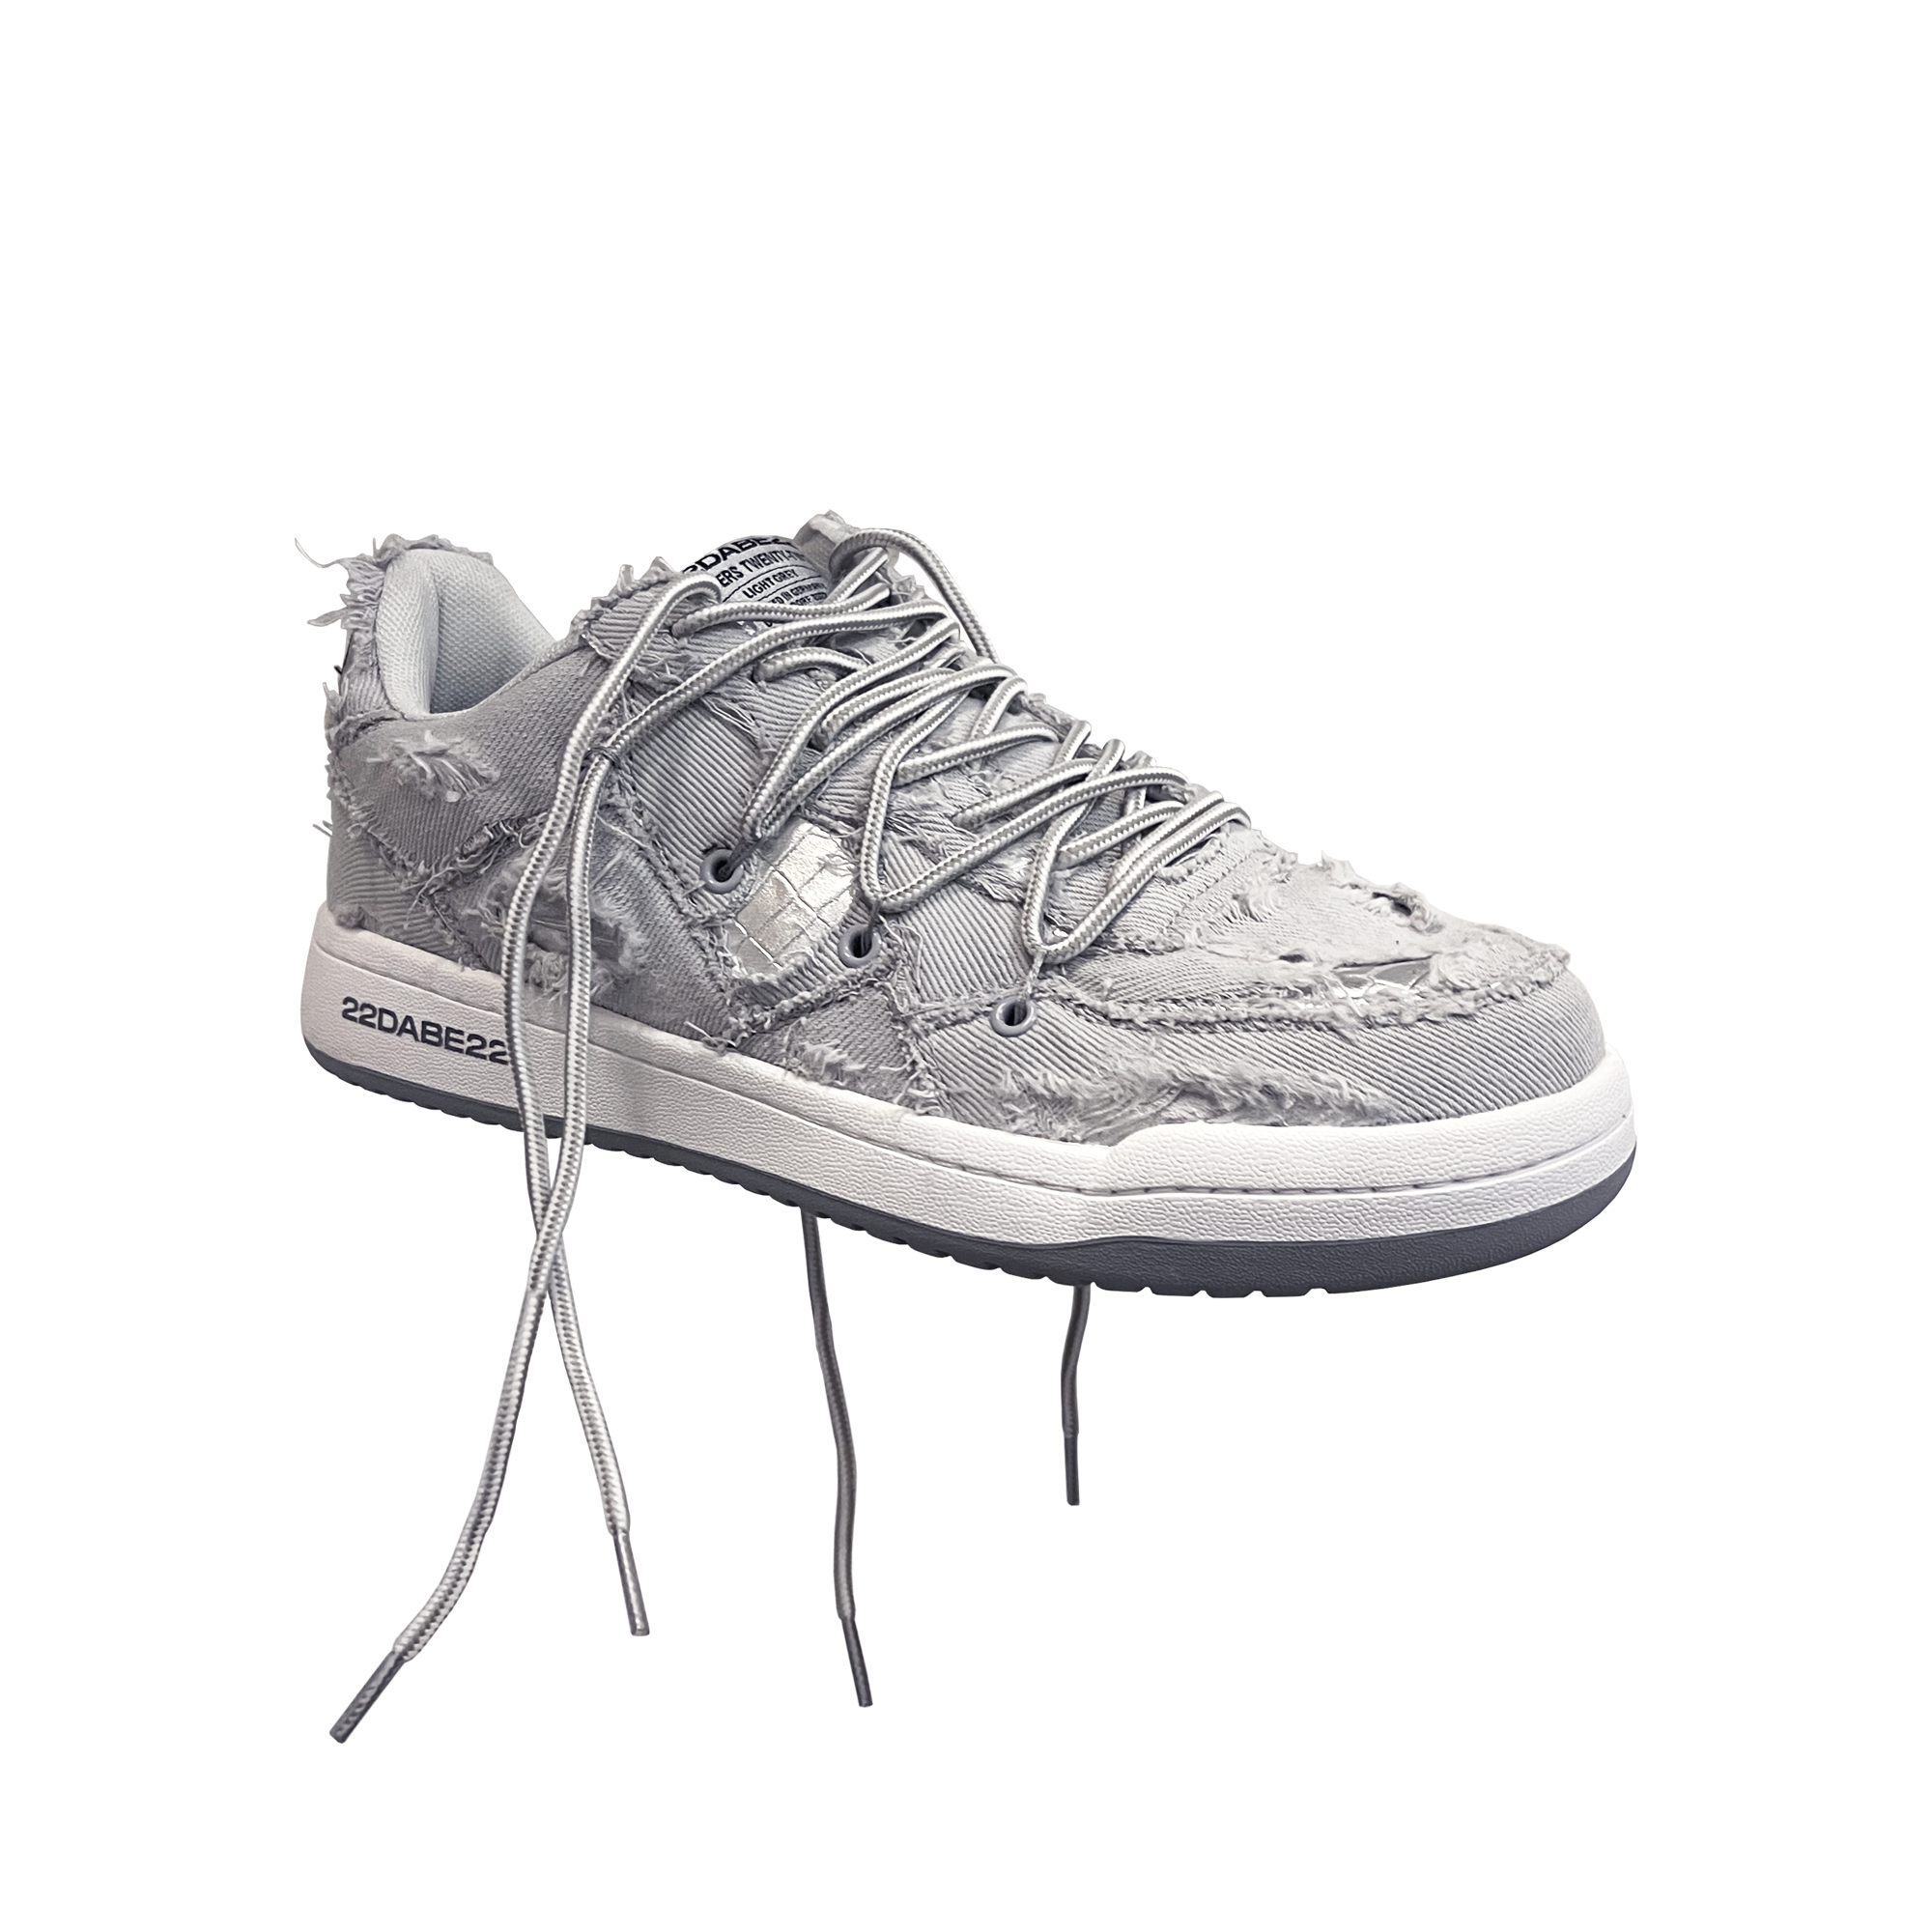 The DABE RANGER TWENTYTWO GREY shoe, a streetwear statement piece with metallic details under denim fabric on the upper. The shoe features double laces for extra style and versatility. Each shoe is handmade and unique, with every hole made by hand, giving it a one-of-a-kind look. The shoe is perfect for those who want to stand out from the crowd and make a fashion statement.